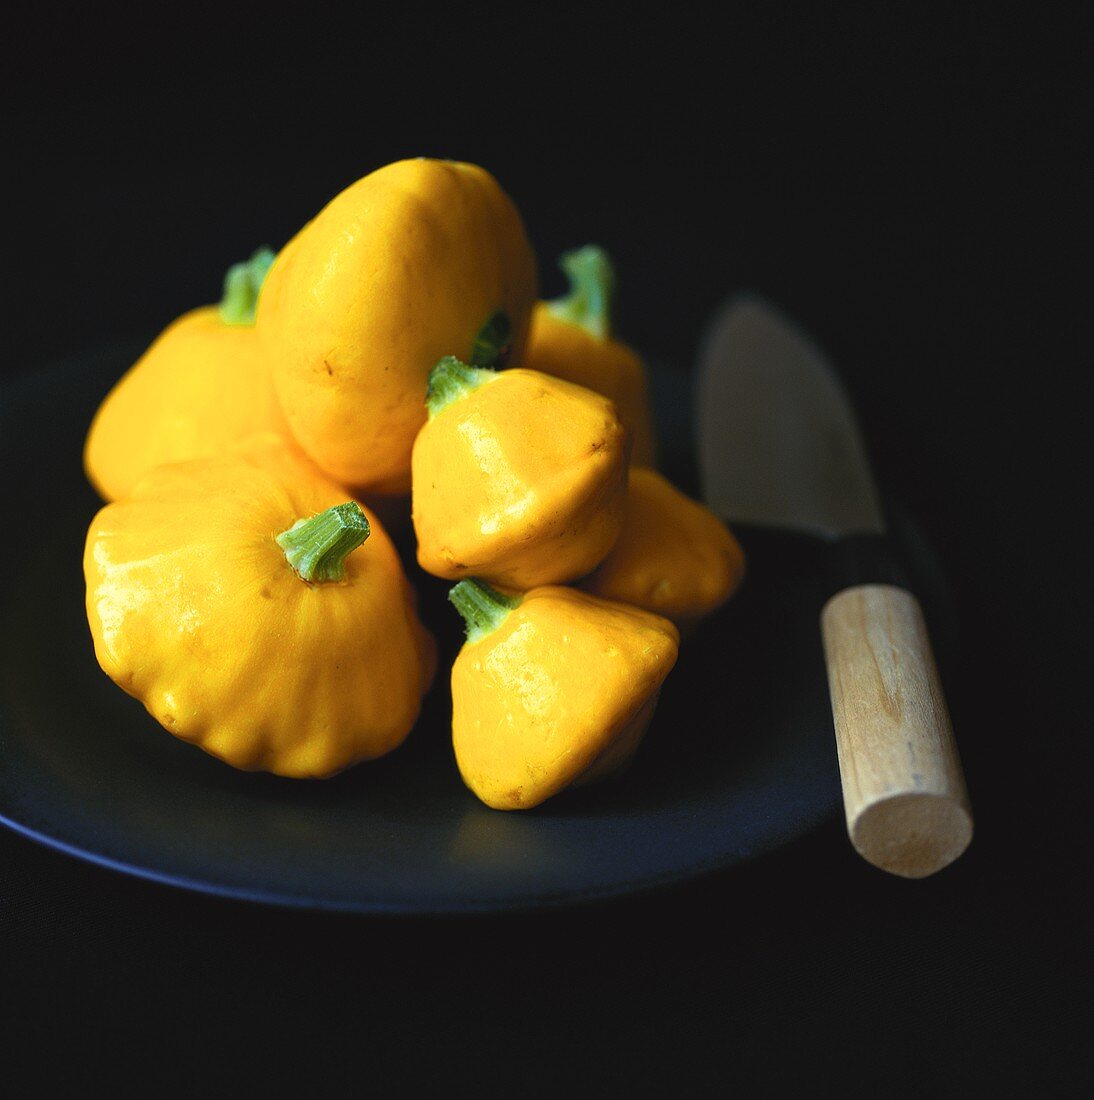 Patty pan squashes on plate with knife